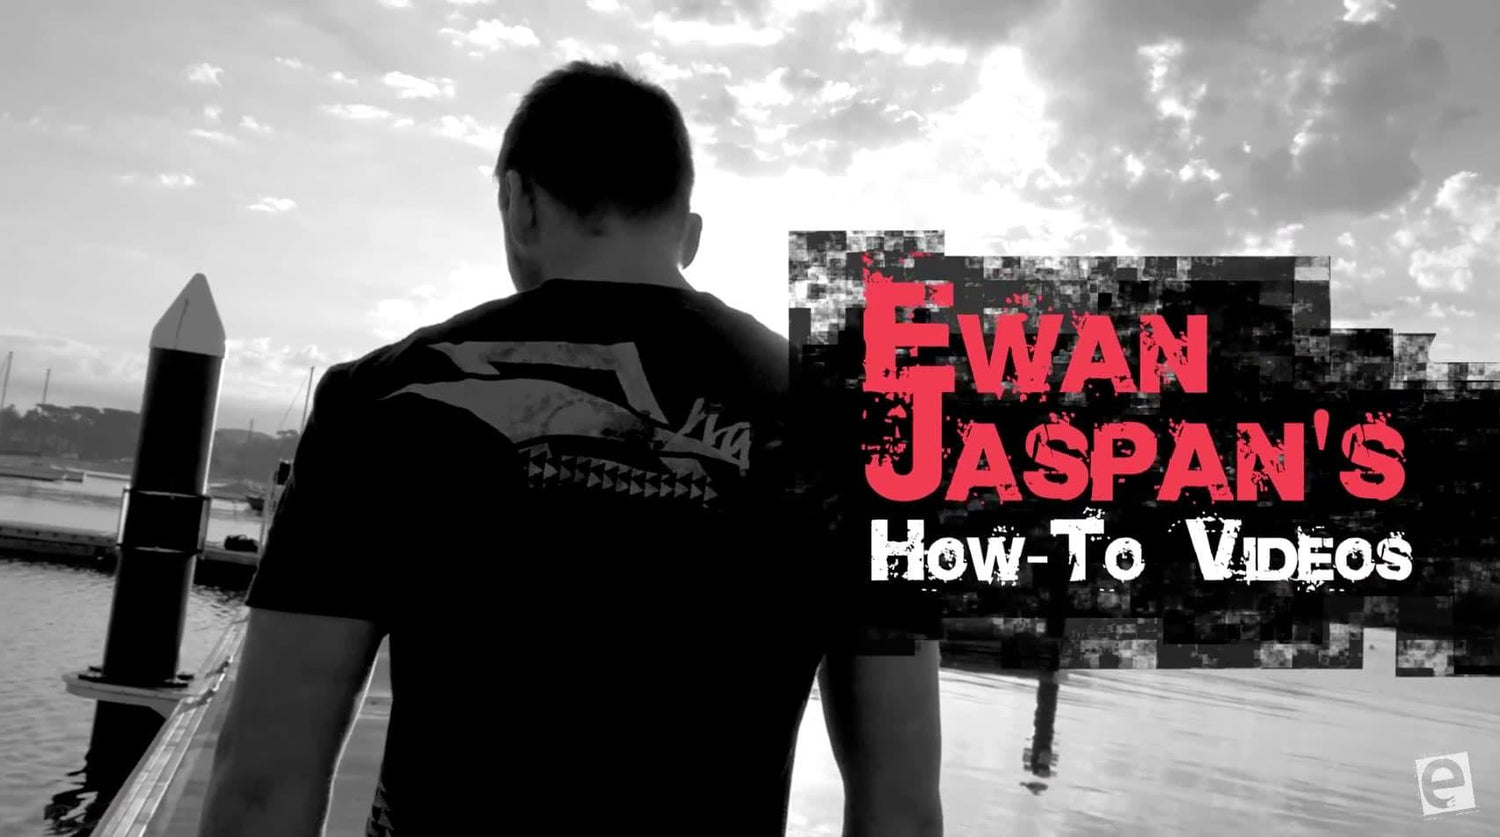 Front Roll to Blind– Ewan Jaspan’s How-to Series - Naish.com